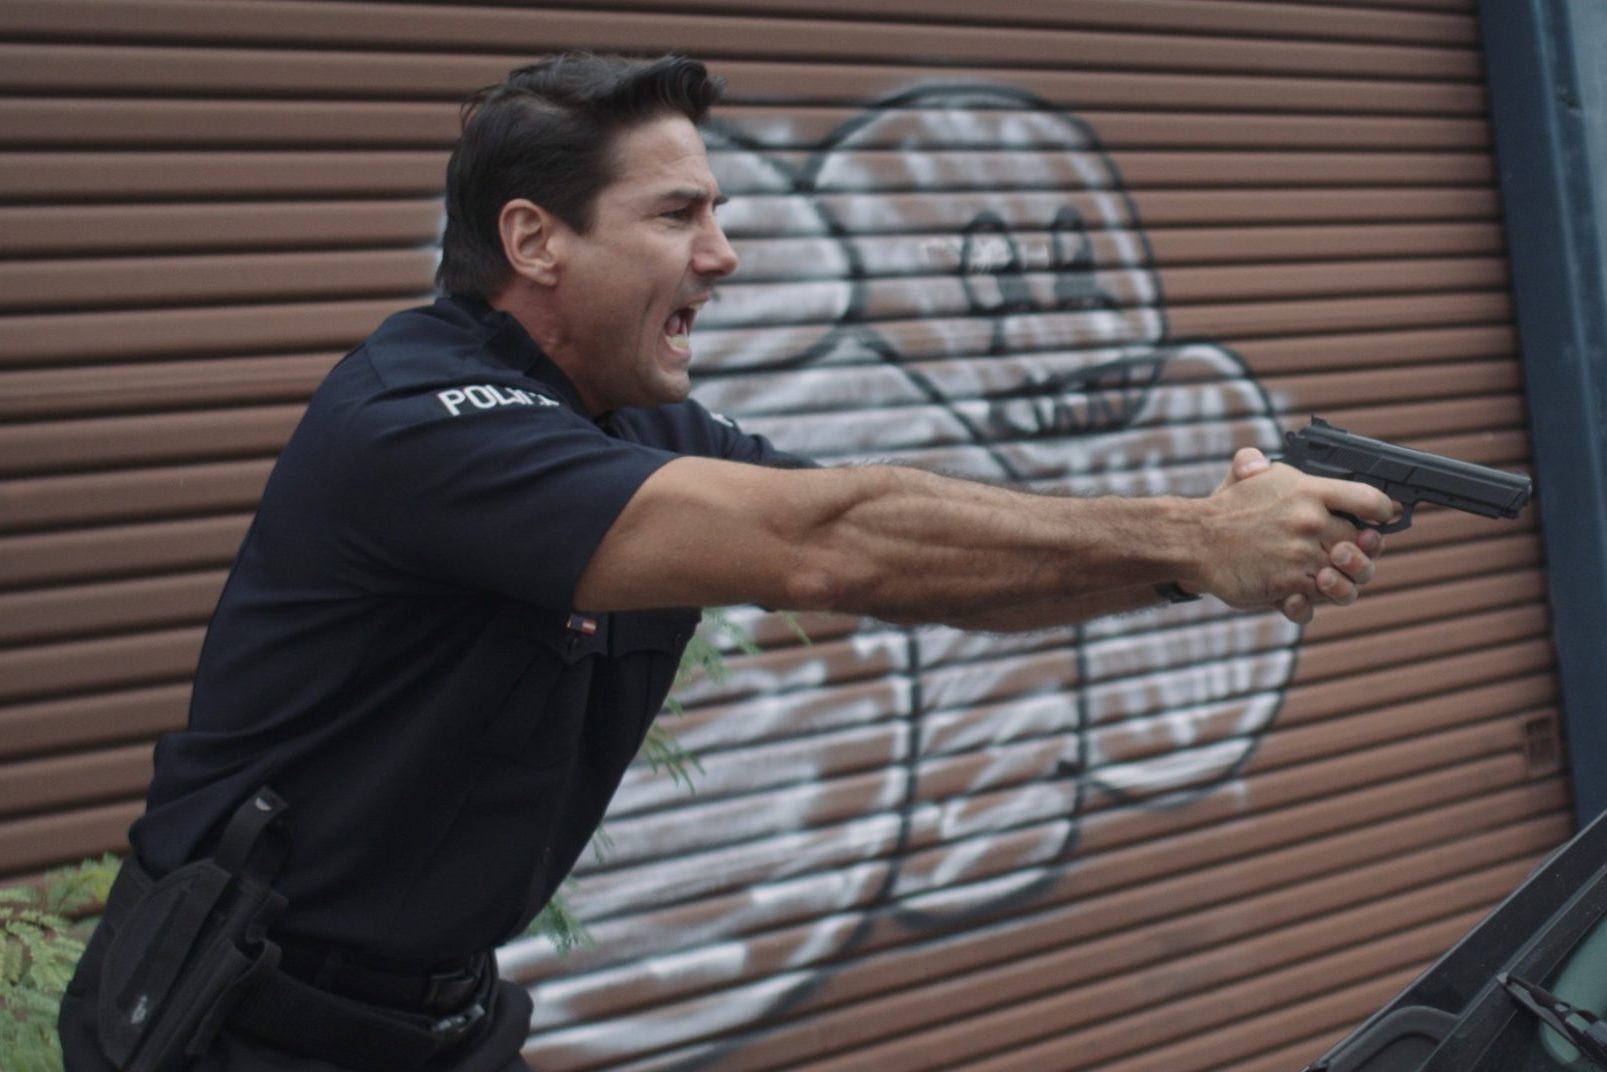 Side profile of police officer wearing uniform holding a gun in outstretched hands shouting with graffiti on wall behind him